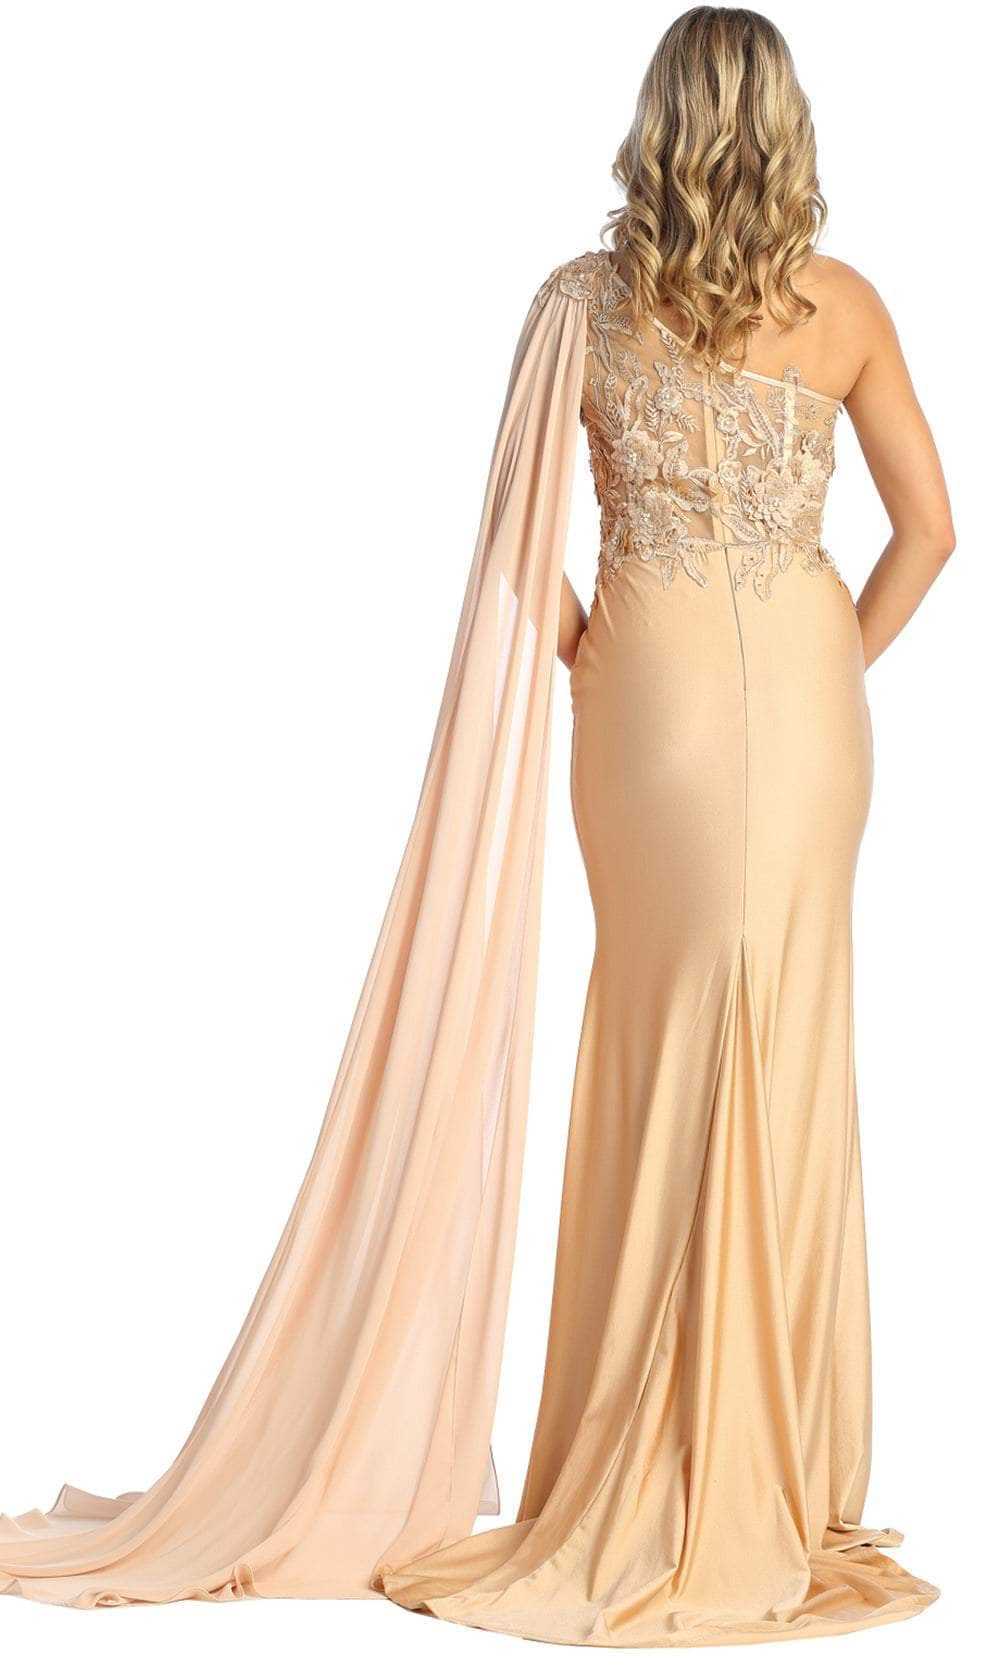 May Queen, May Queen - Embellished One Shoulder Evening Dress RQ7943